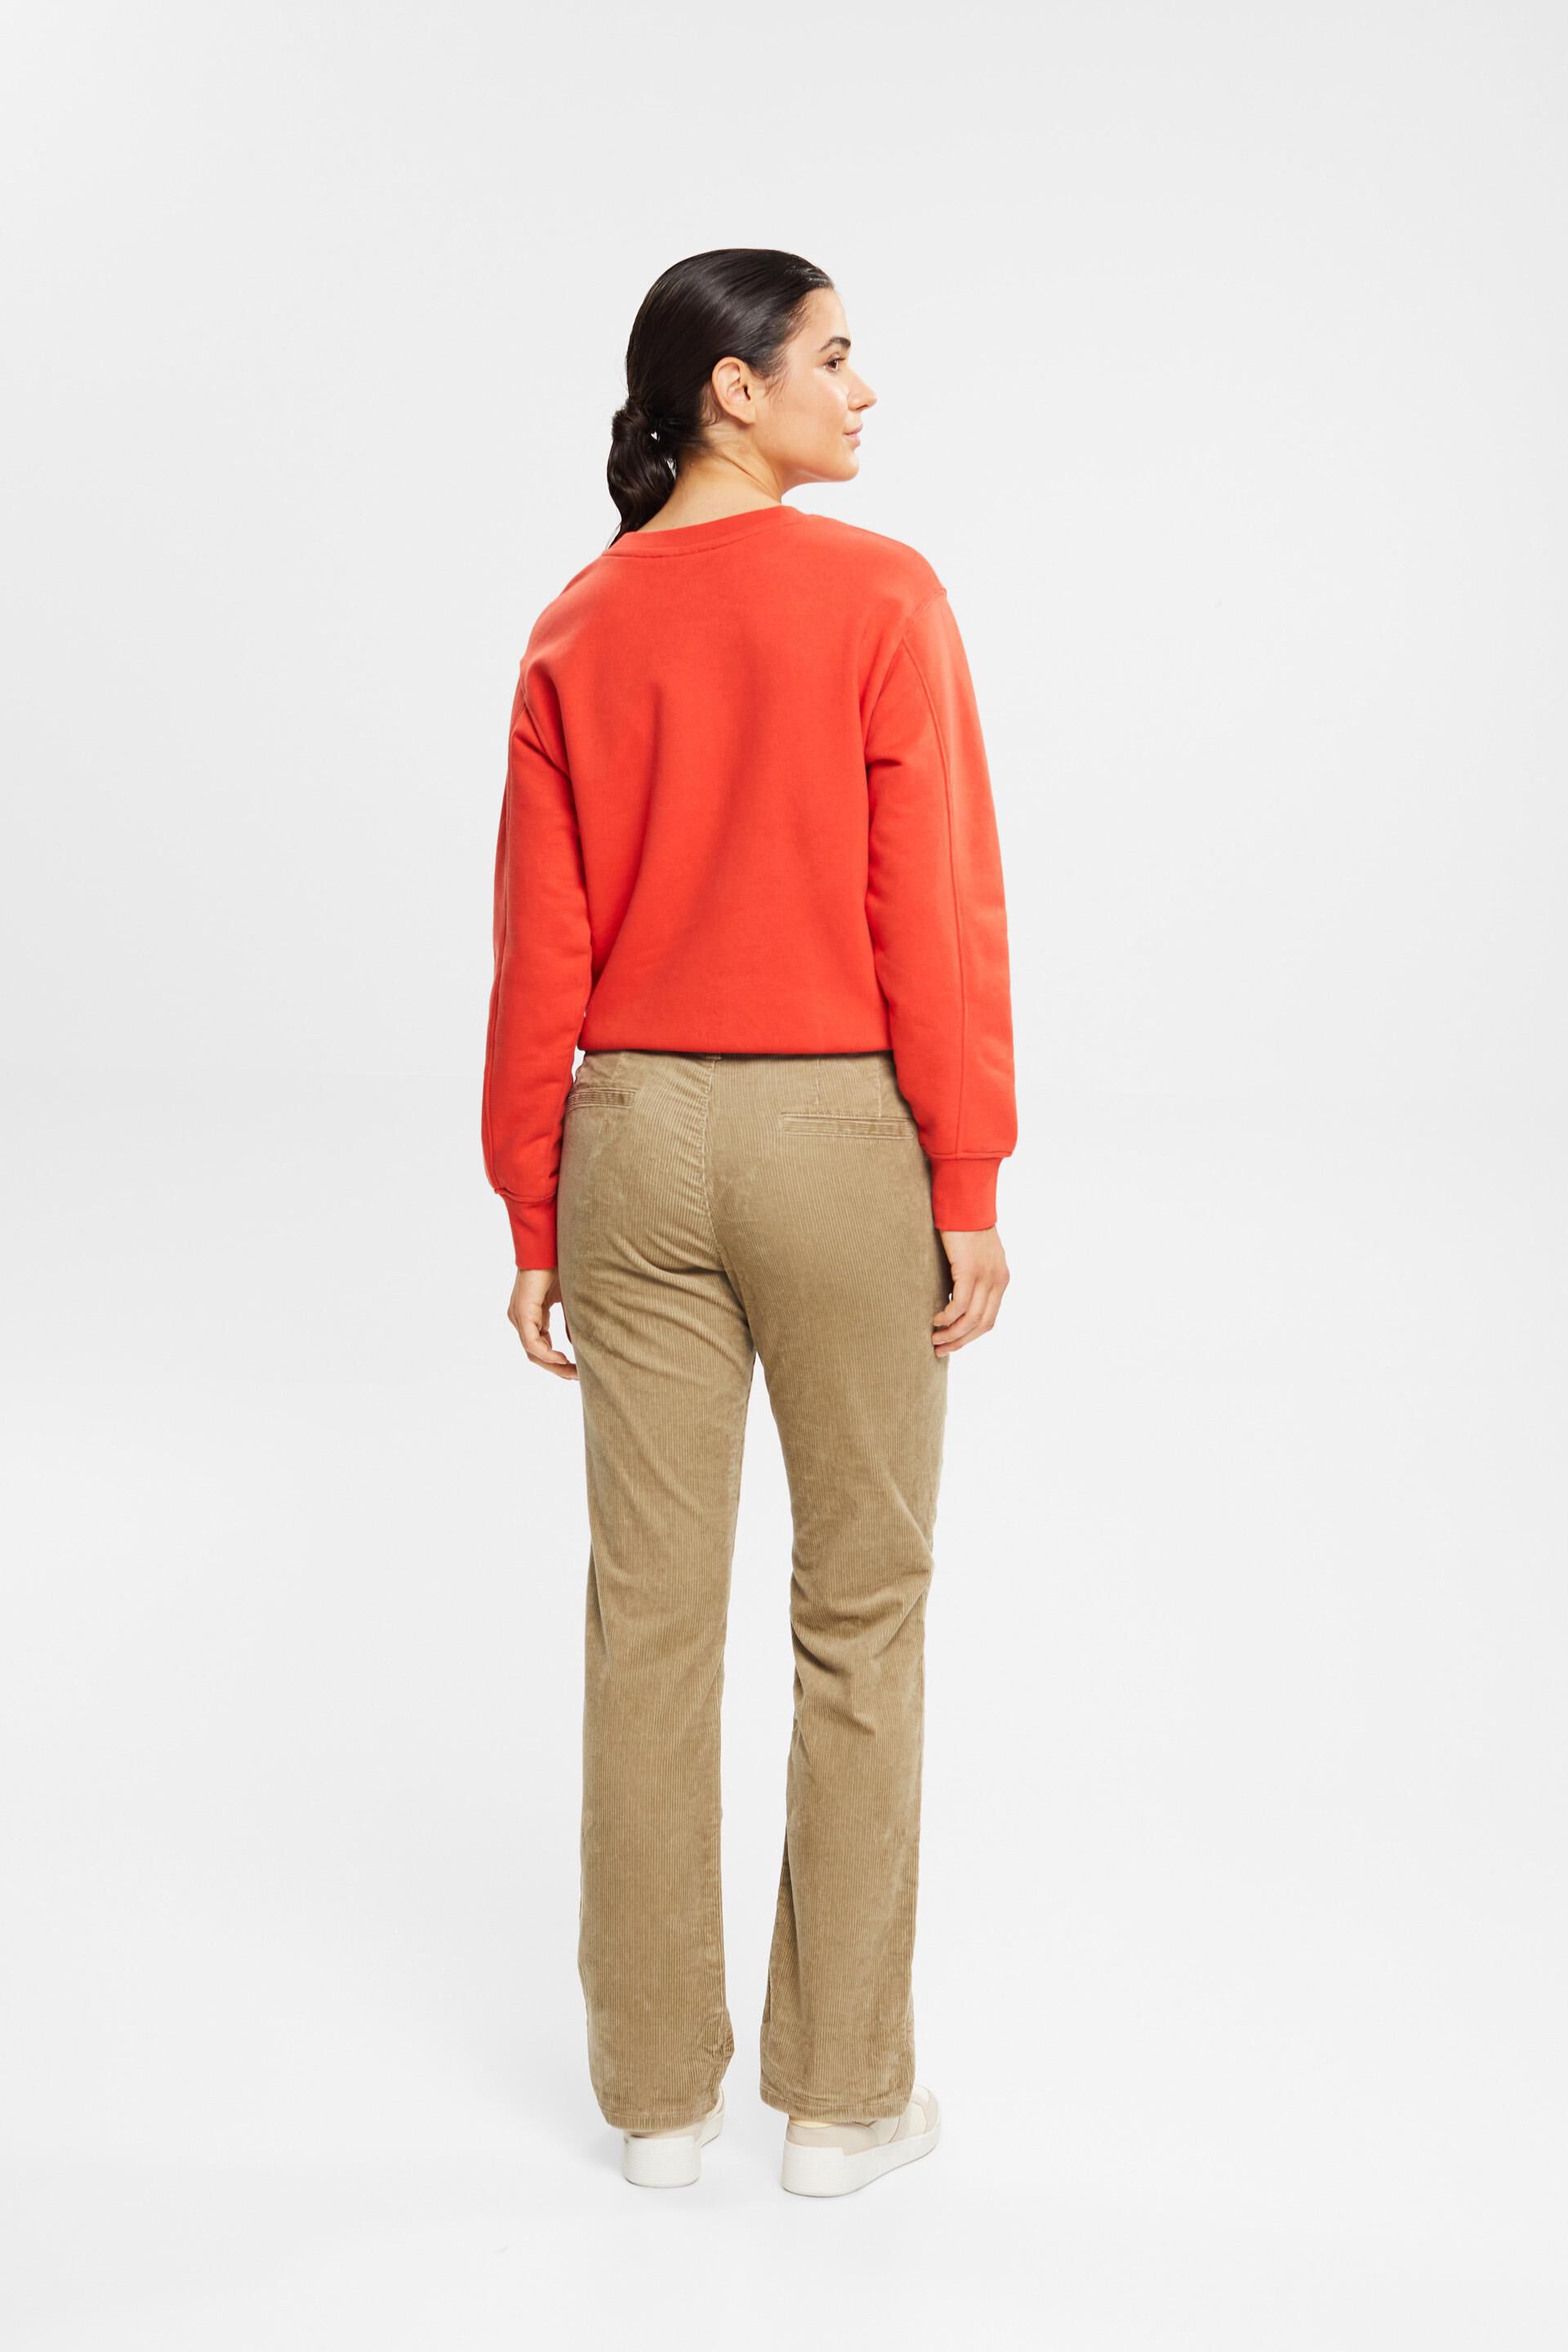 Shop the Latest in Womens Fashion 80s Straight corduroy trousers  ESPRIT  Taiwan Official Online Store